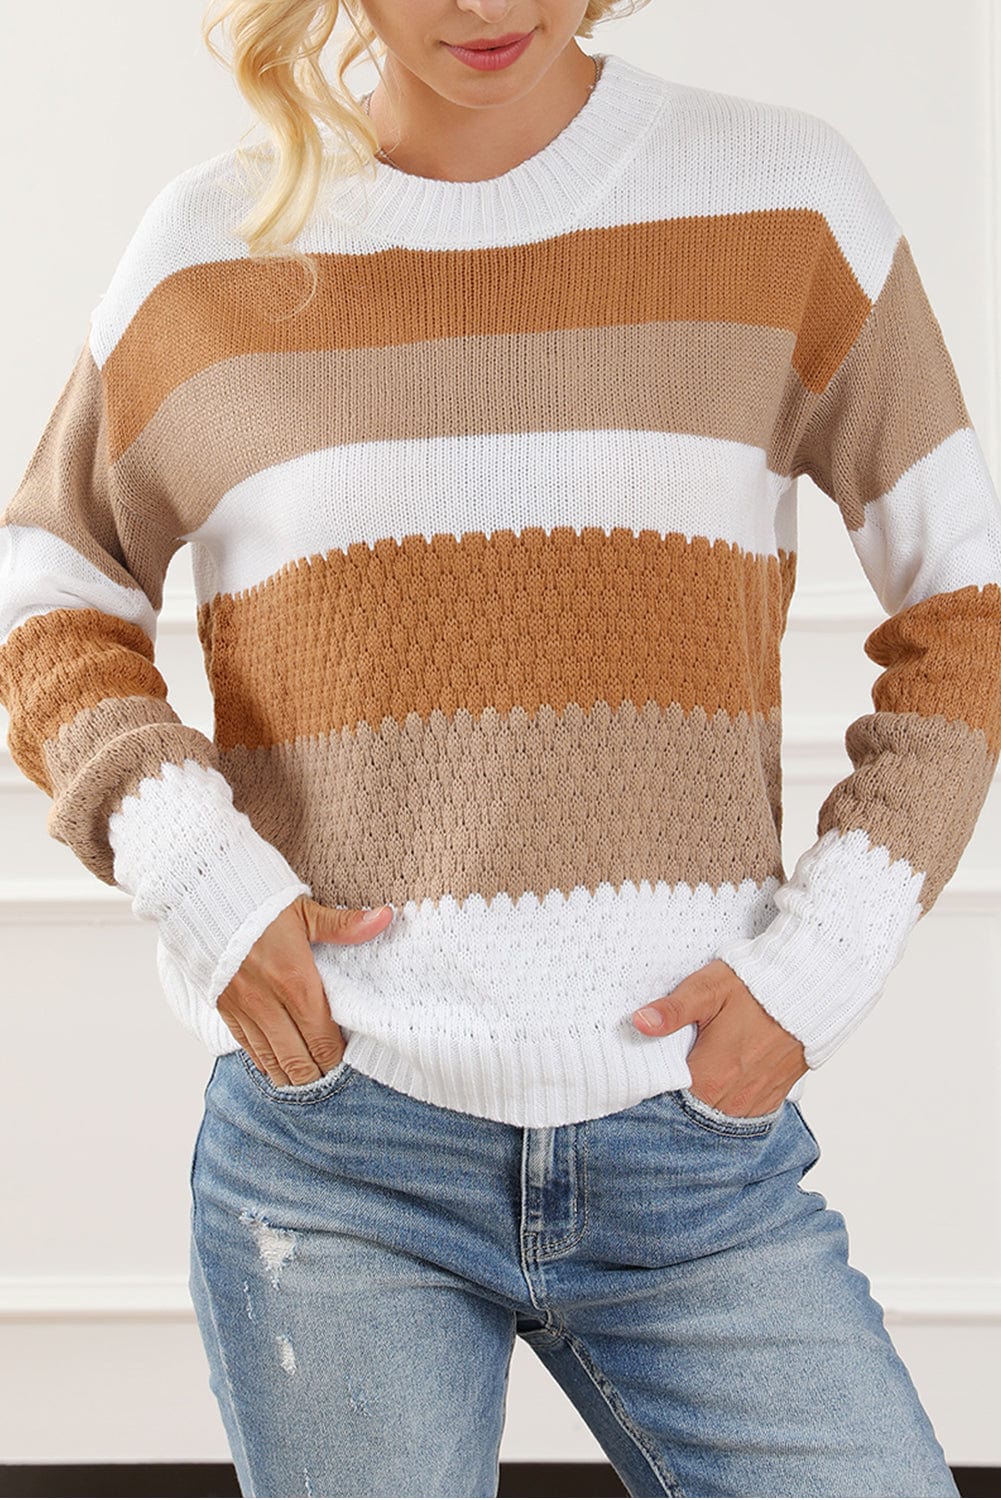 The802Gypsy  Tops Chestnut / M / 100%Acrylic Chestnut Striped Cable Knit Drop Shoulder Sweater